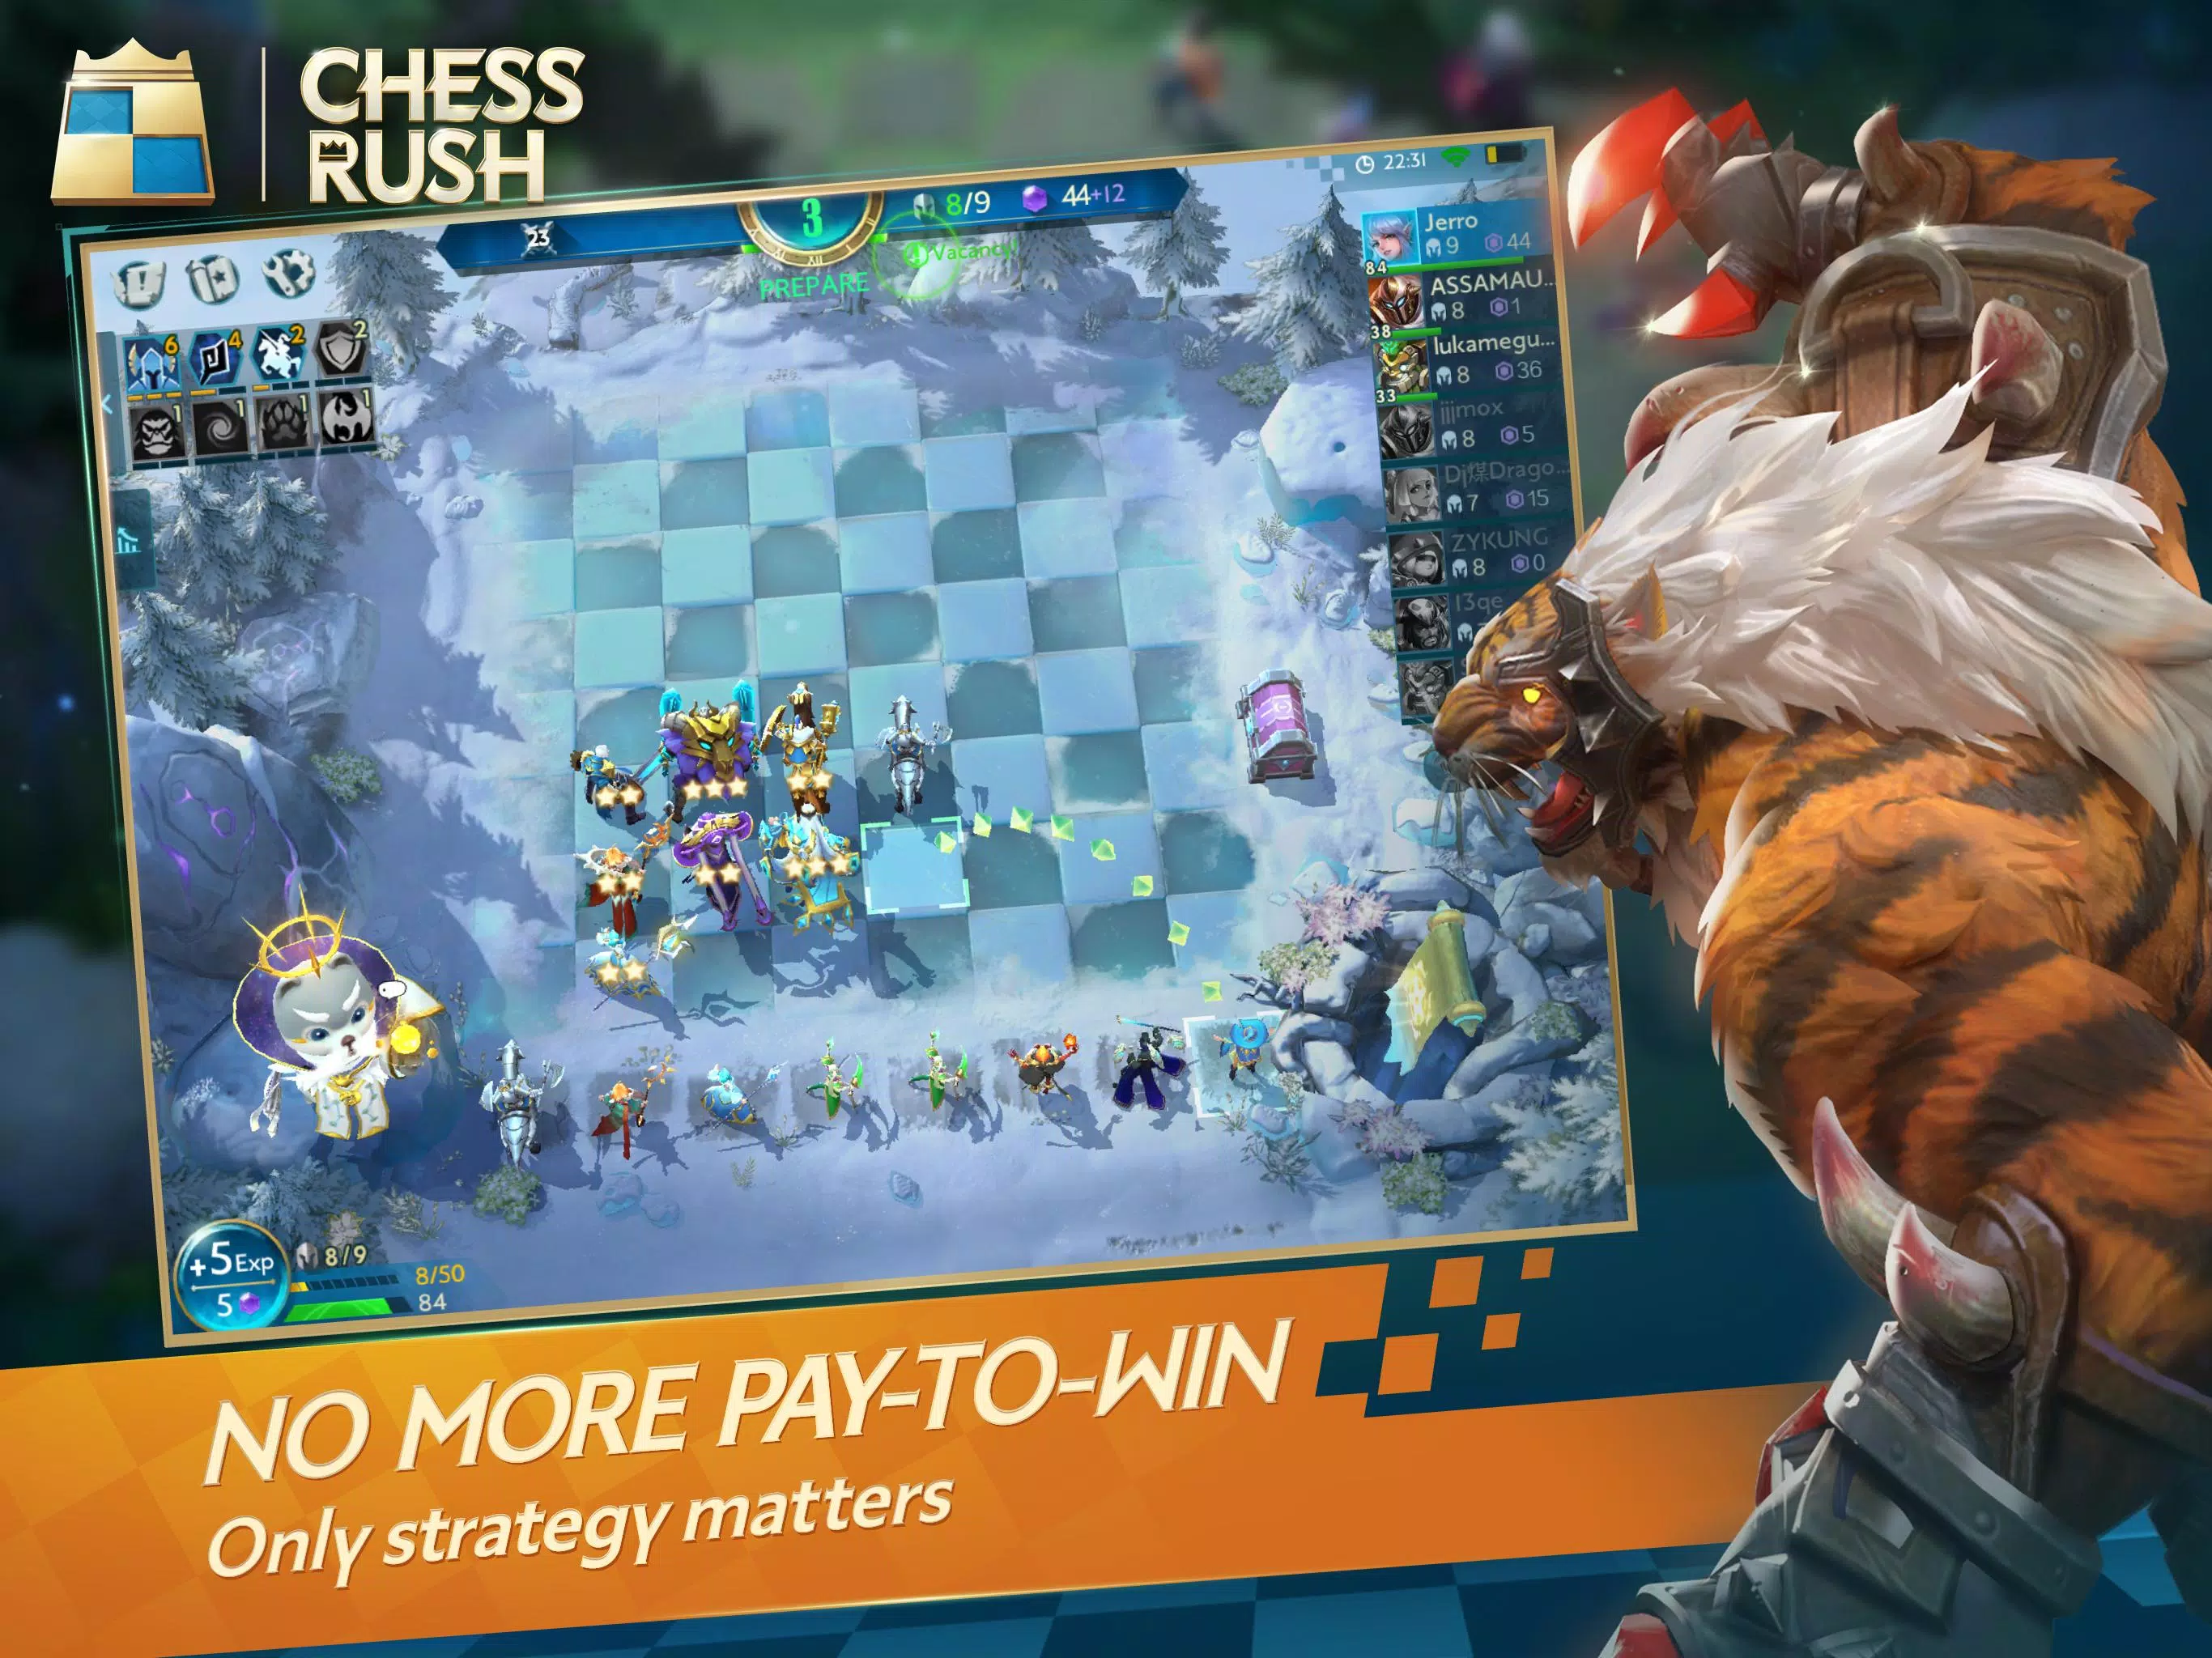 Chess Rush's 4v4 mode is available now